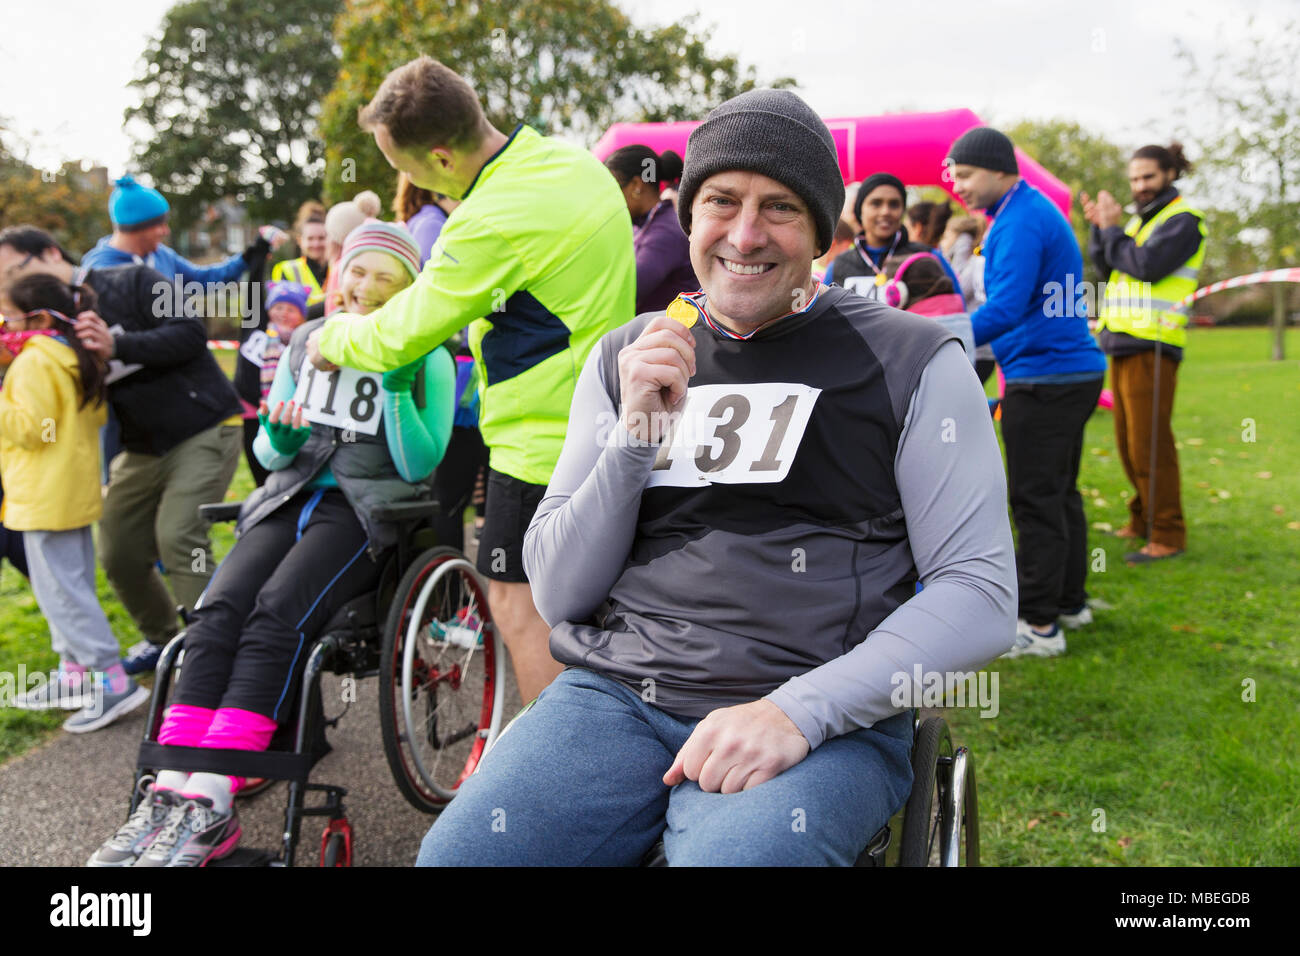 Portrait smiling, confident man in wheelchair showing medal at charity race in park Stock Photo